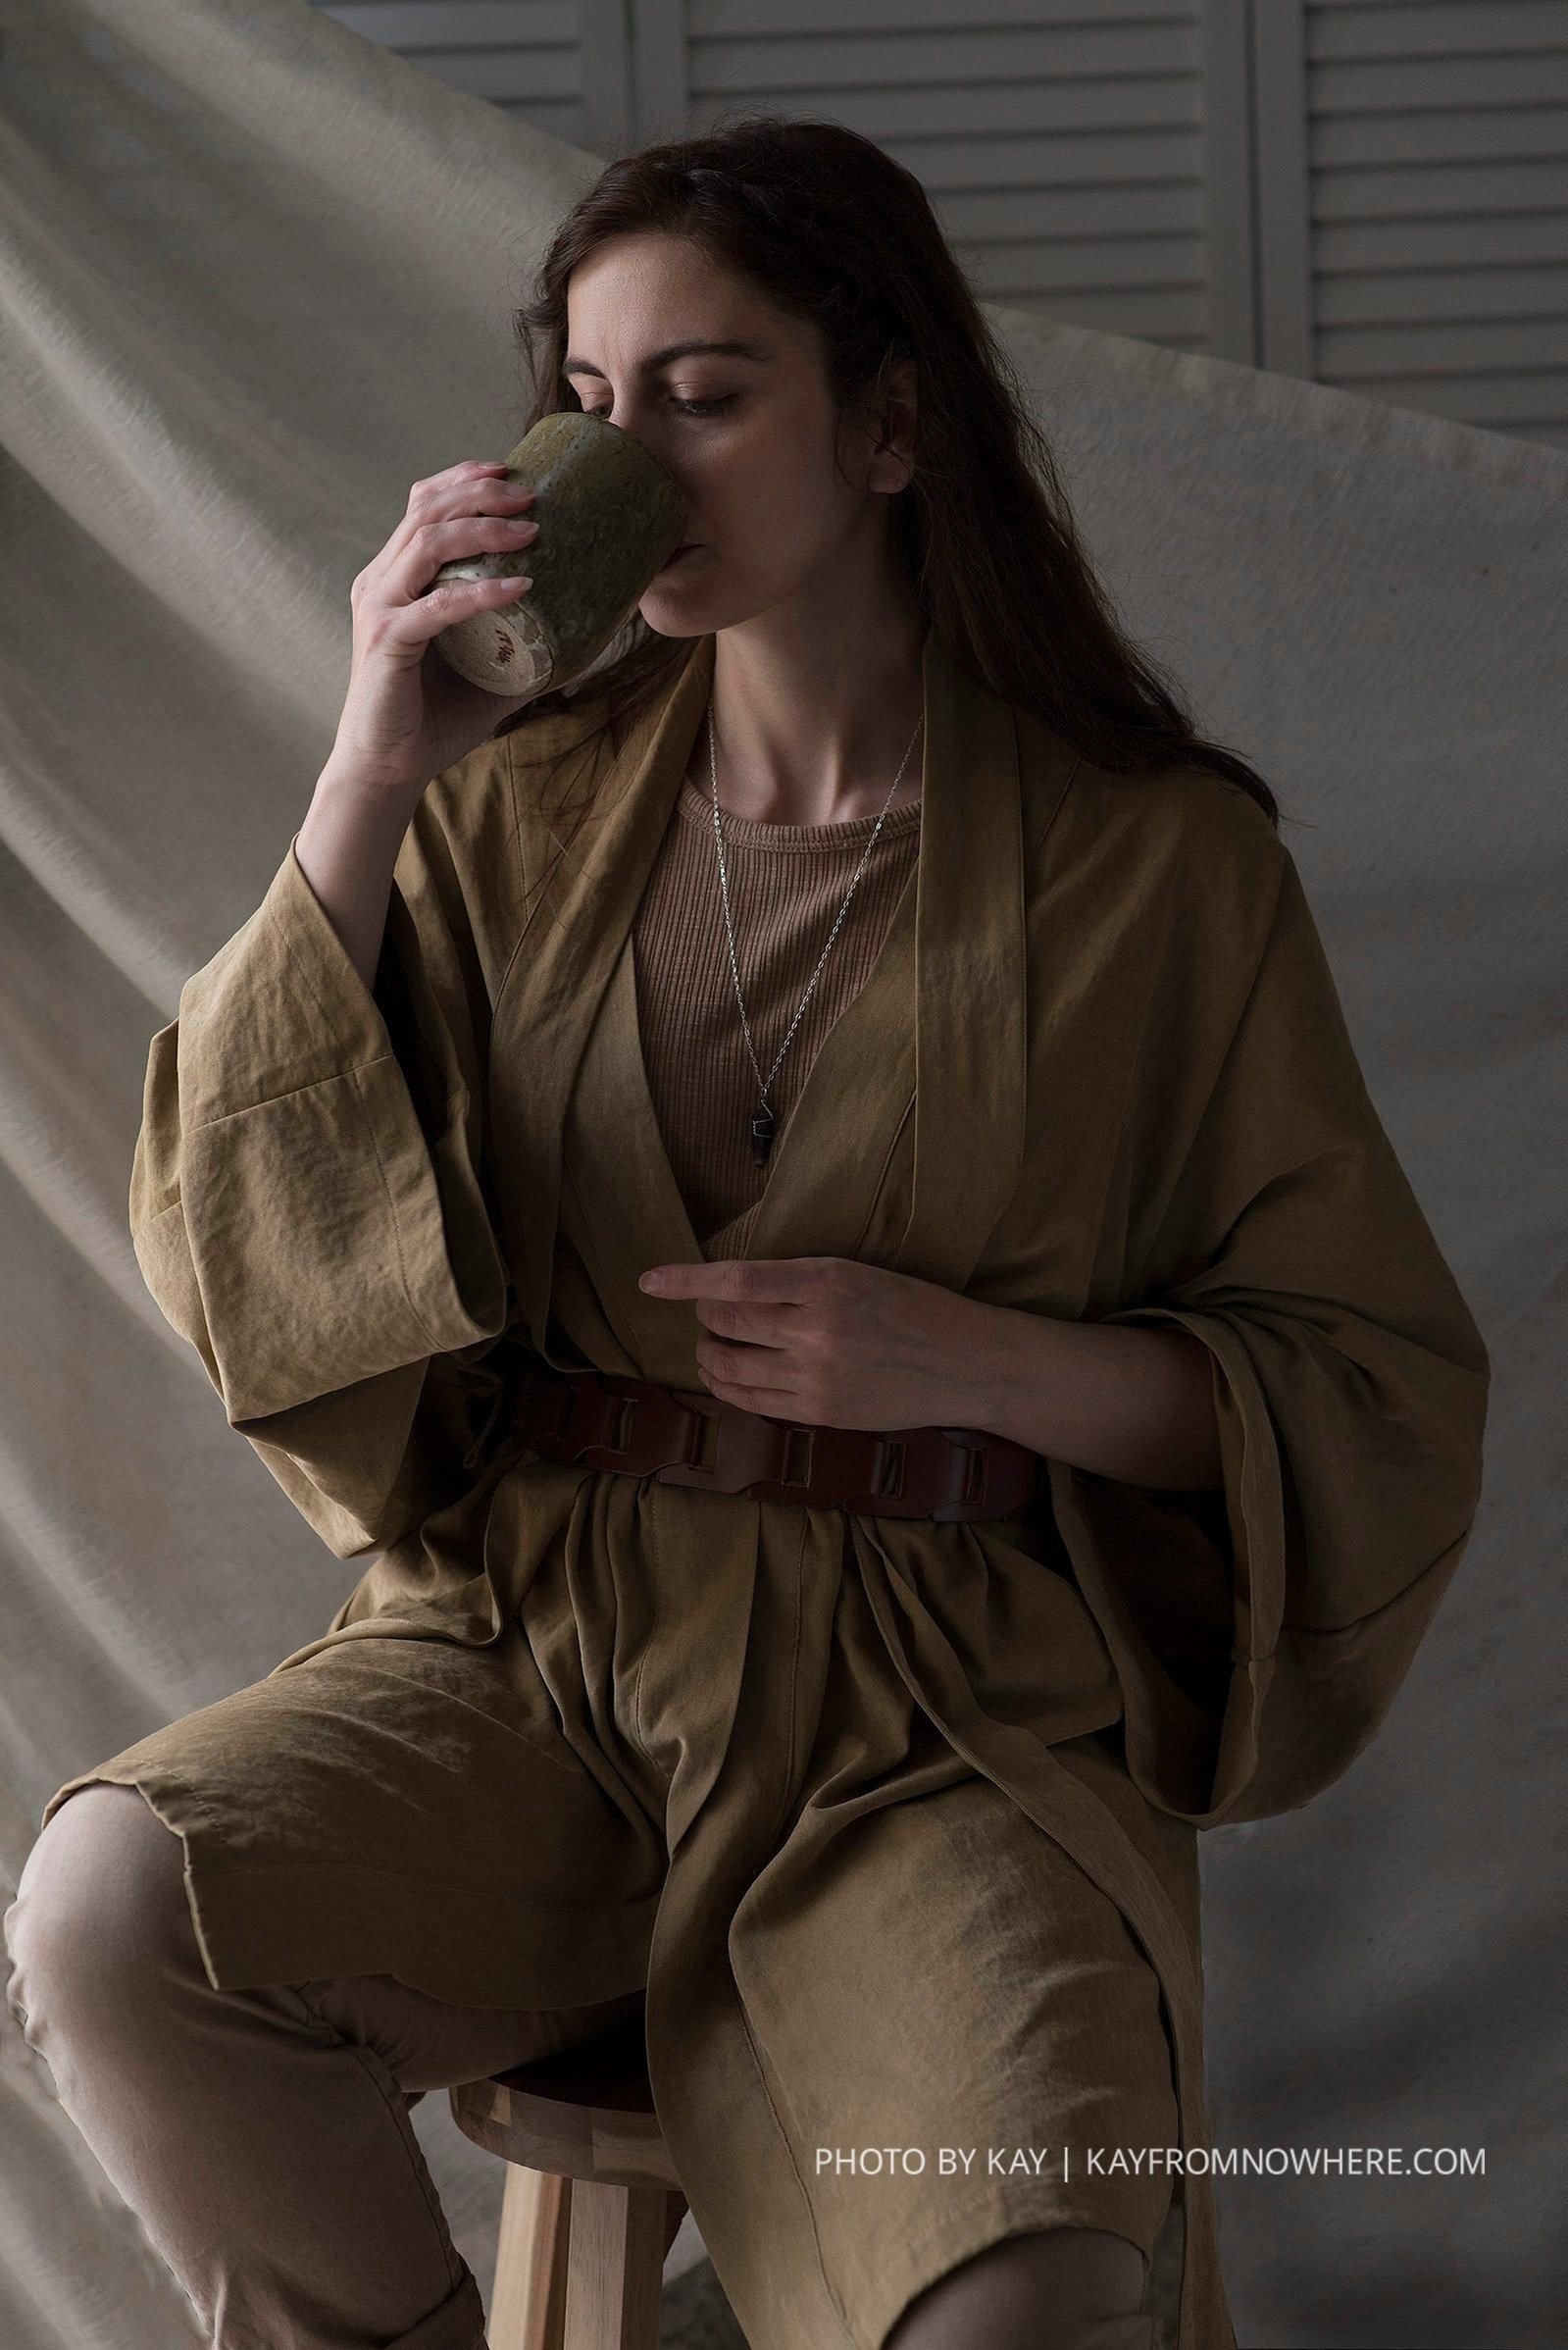 Drinking tea in a Jedi-styled photoshoot